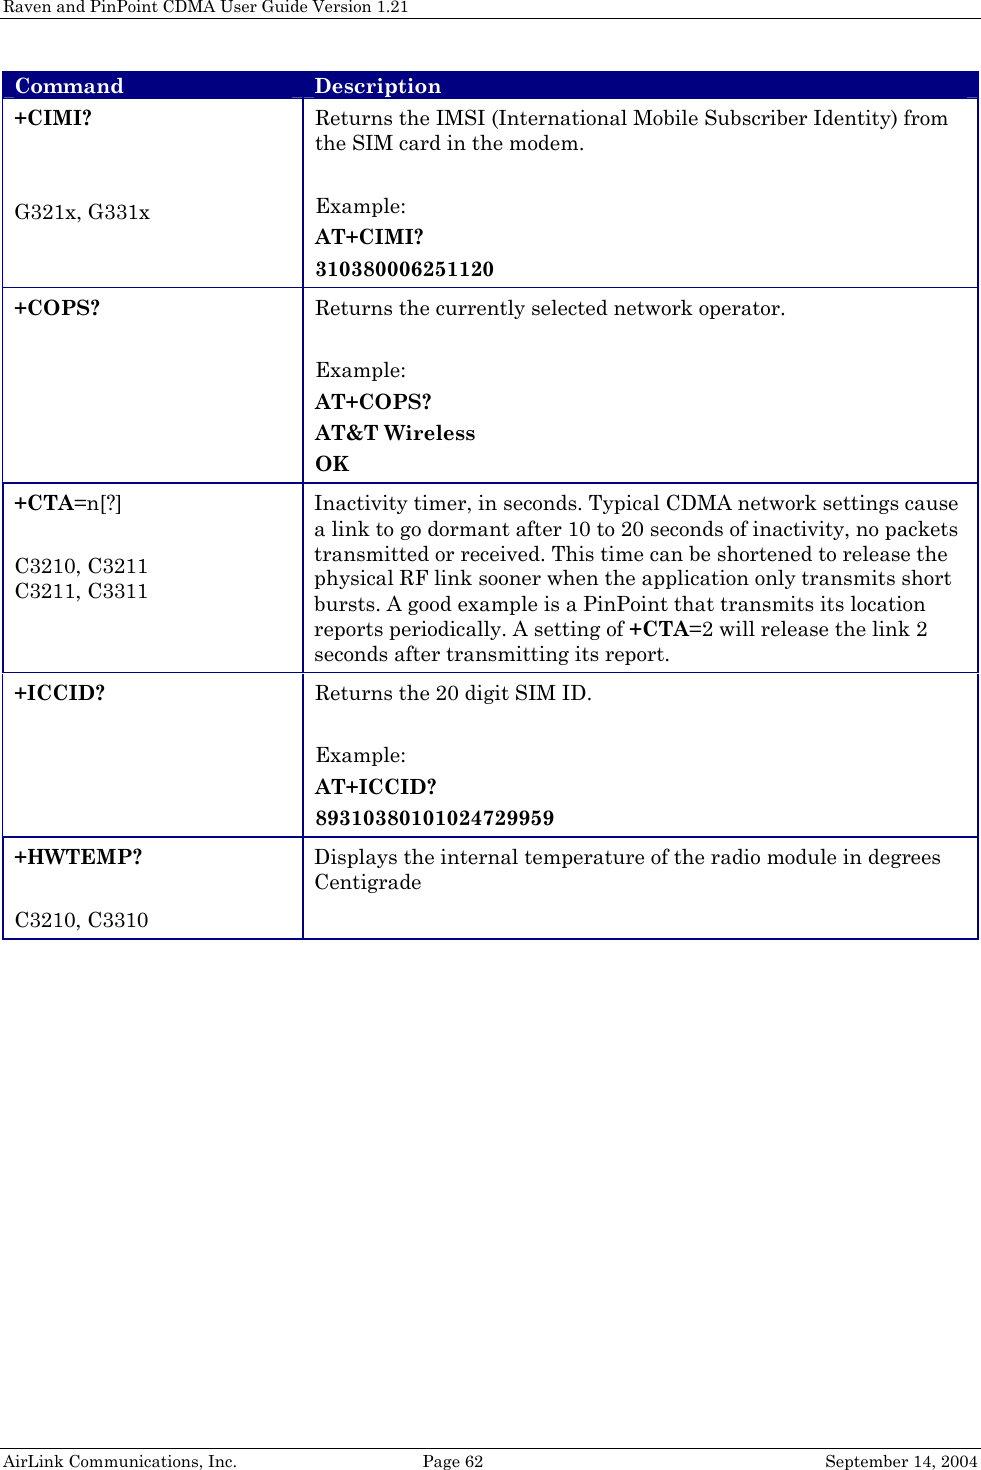 Raven and PinPoint CDMA User Guide Version 1.21 AirLink Communications, Inc.  Page 62  September 14, 2004 Command  Description +CIMI?   G321x, G331x Returns the IMSI (International Mobile Subscriber Identity) from the SIM card in the modem.  Example: AT+CIMI? 310380006251120 +COPS?  Returns the currently selected network operator.  Example: AT+COPS? AT&amp;T Wireless OK +CTA=n[?]  C3210, C3211 C3211, C3311 Inactivity timer, in seconds. Typical CDMA network settings cause a link to go dormant after 10 to 20 seconds of inactivity, no packets transmitted or received. This time can be shortened to release the physical RF link sooner when the application only transmits short bursts. A good example is a PinPoint that transmits its location reports periodically. A setting of +CTA=2 will release the link 2 seconds after transmitting its report. +ICCID?  Returns the 20 digit SIM ID.  Example: AT+ICCID? 89310380101024729959 +HWTEMP?   C3210, C3310 Displays the internal temperature of the radio module in degrees Centigrade 